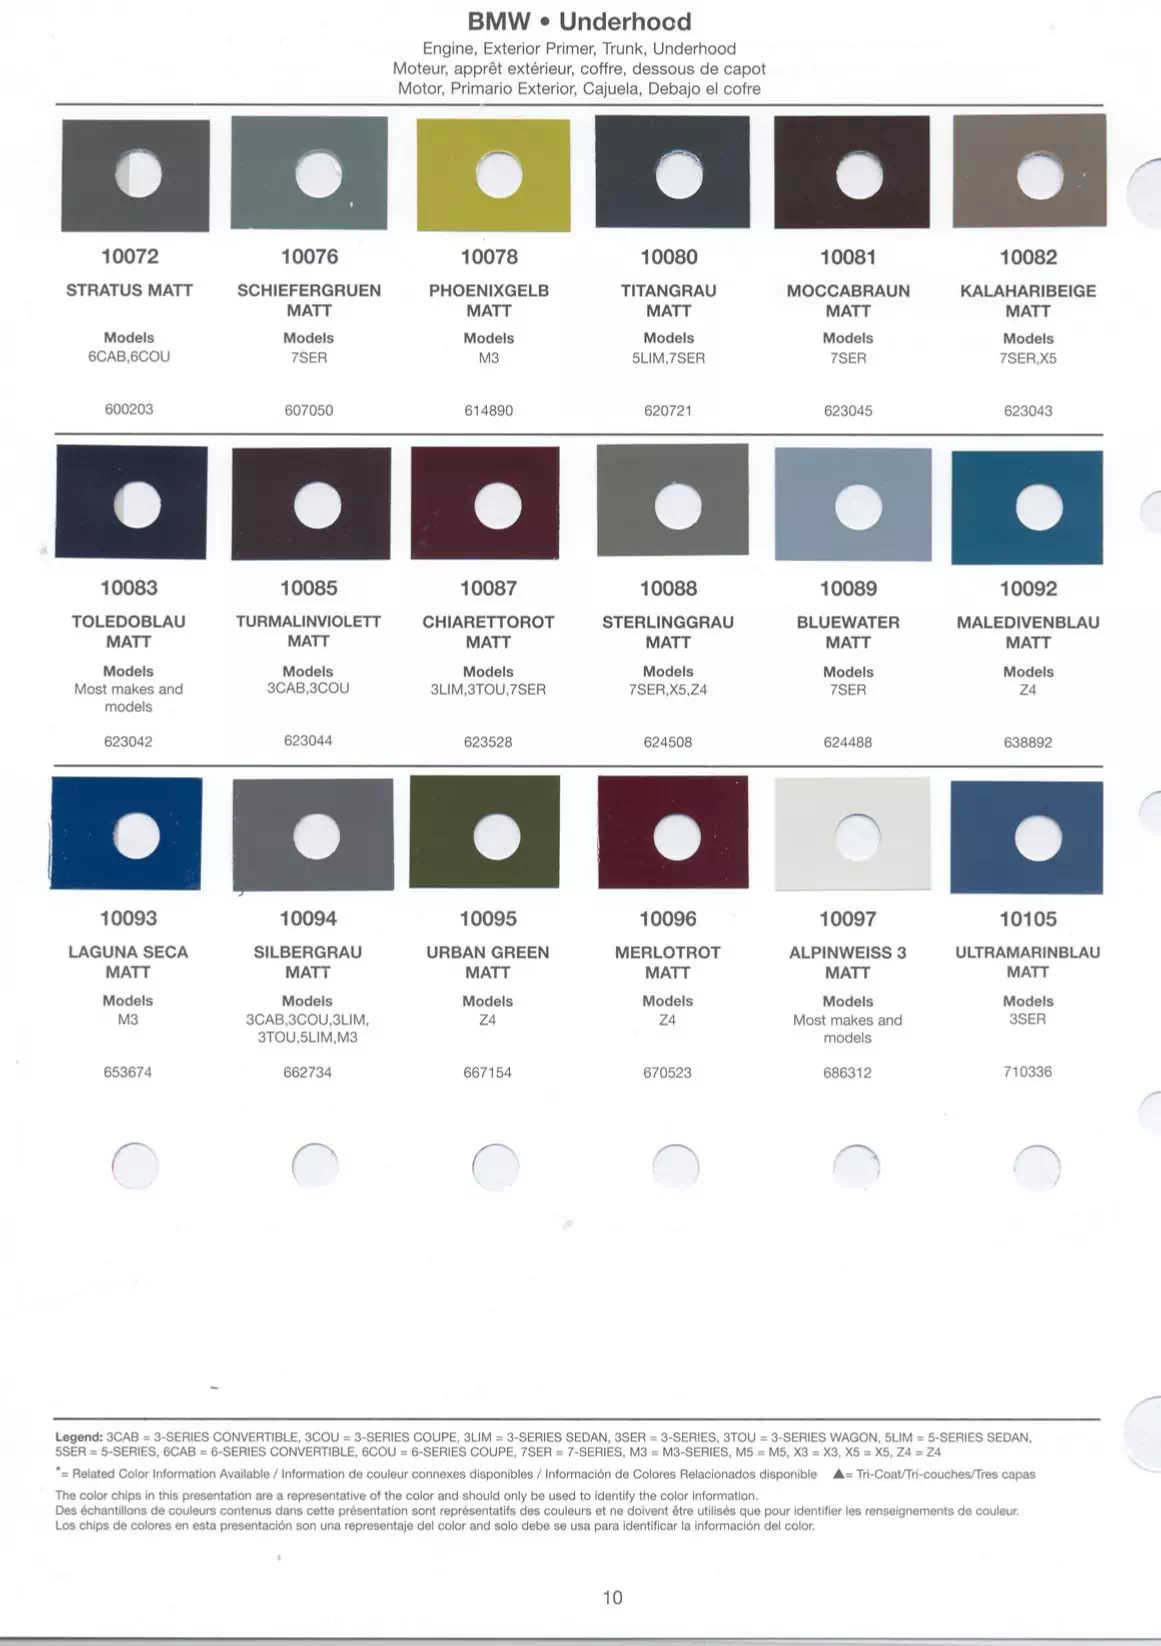 paint charts for main body, underhood and accent colors for 2005 bmw vehicles